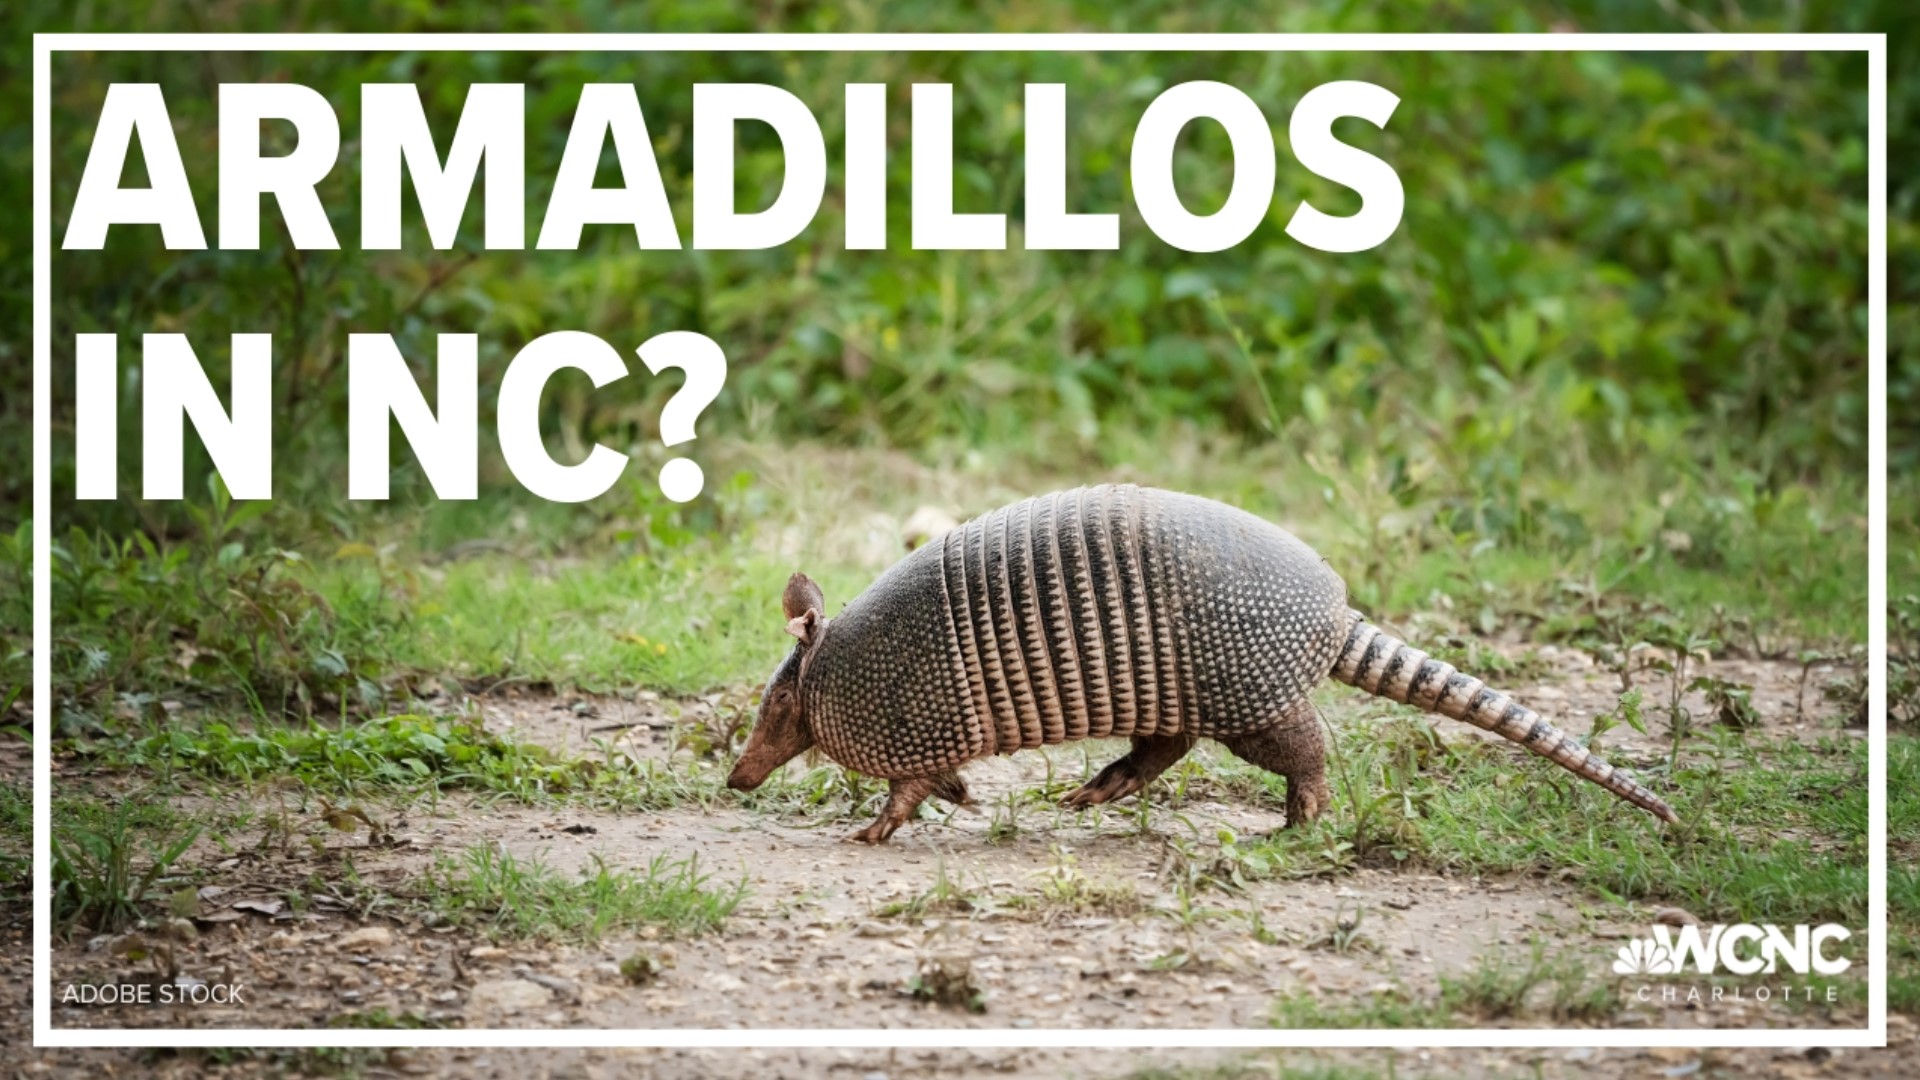 Armadillos are moving into North Carolina and officials want your help tracking them.